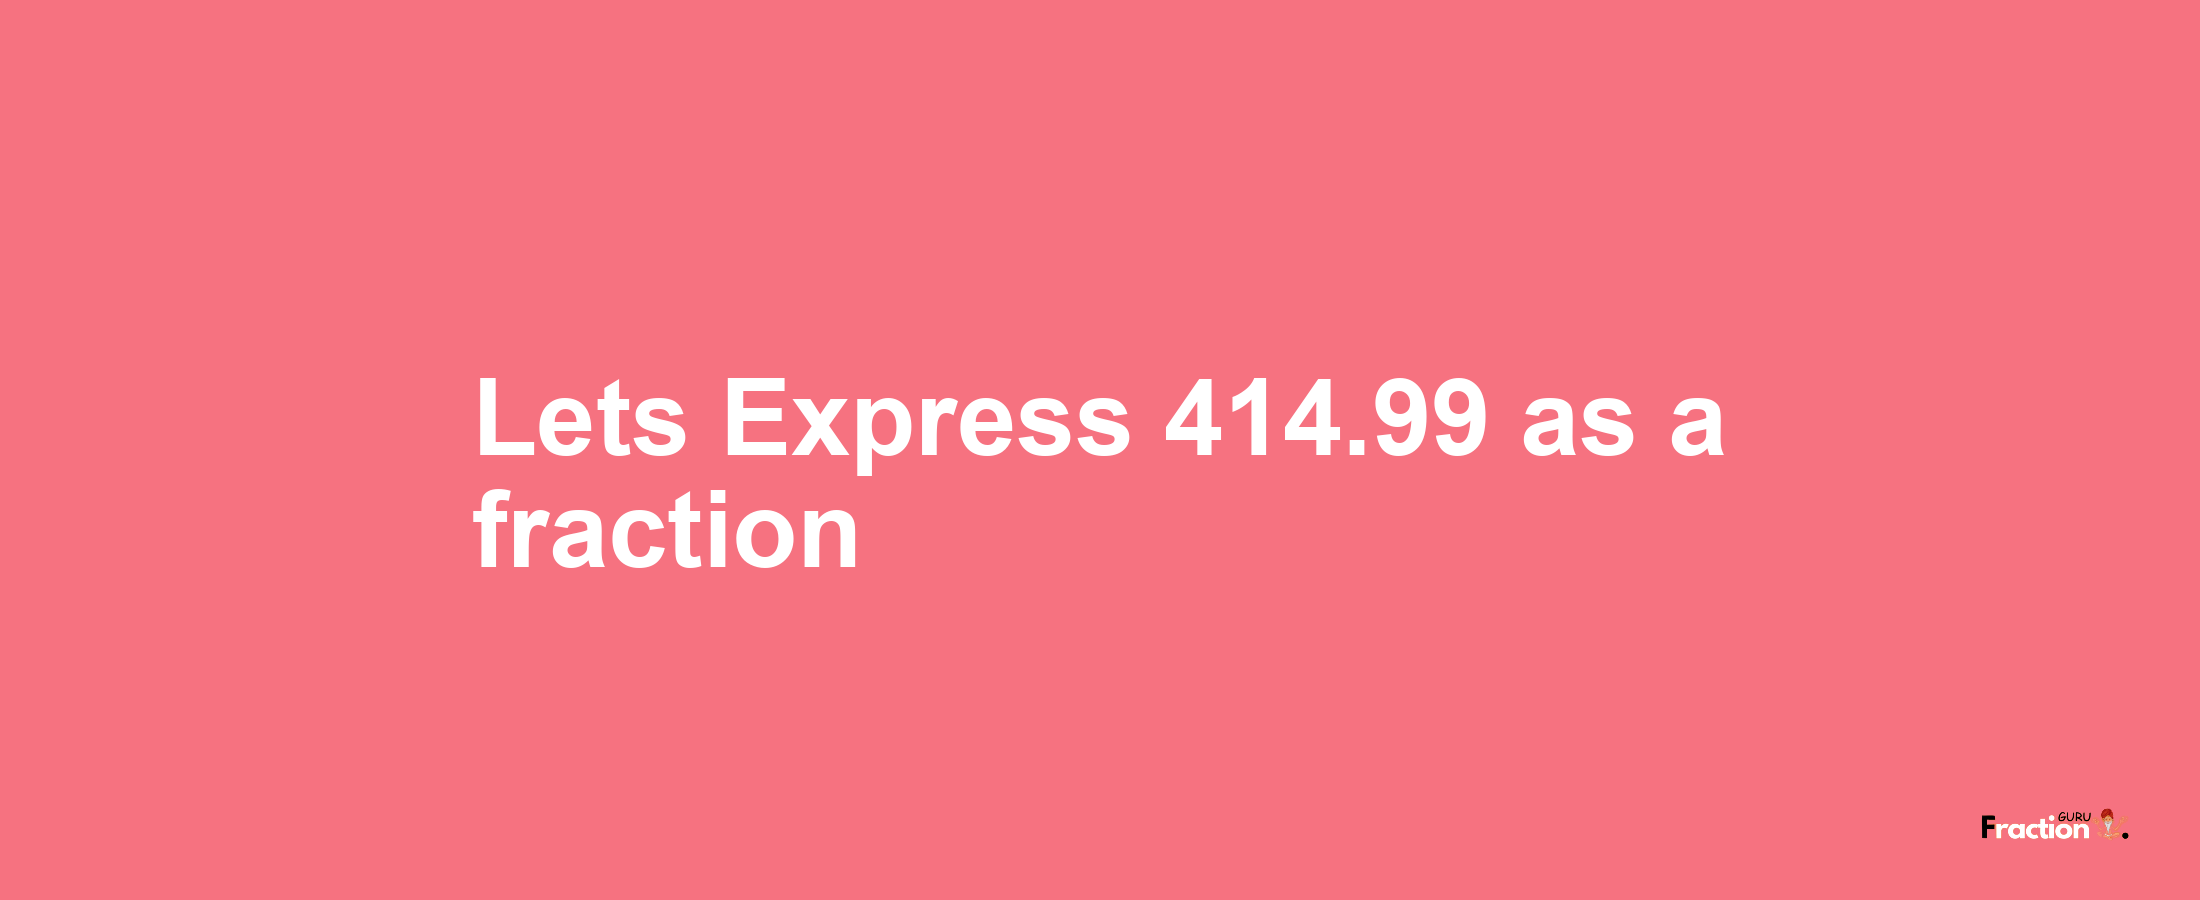 Lets Express 414.99 as afraction